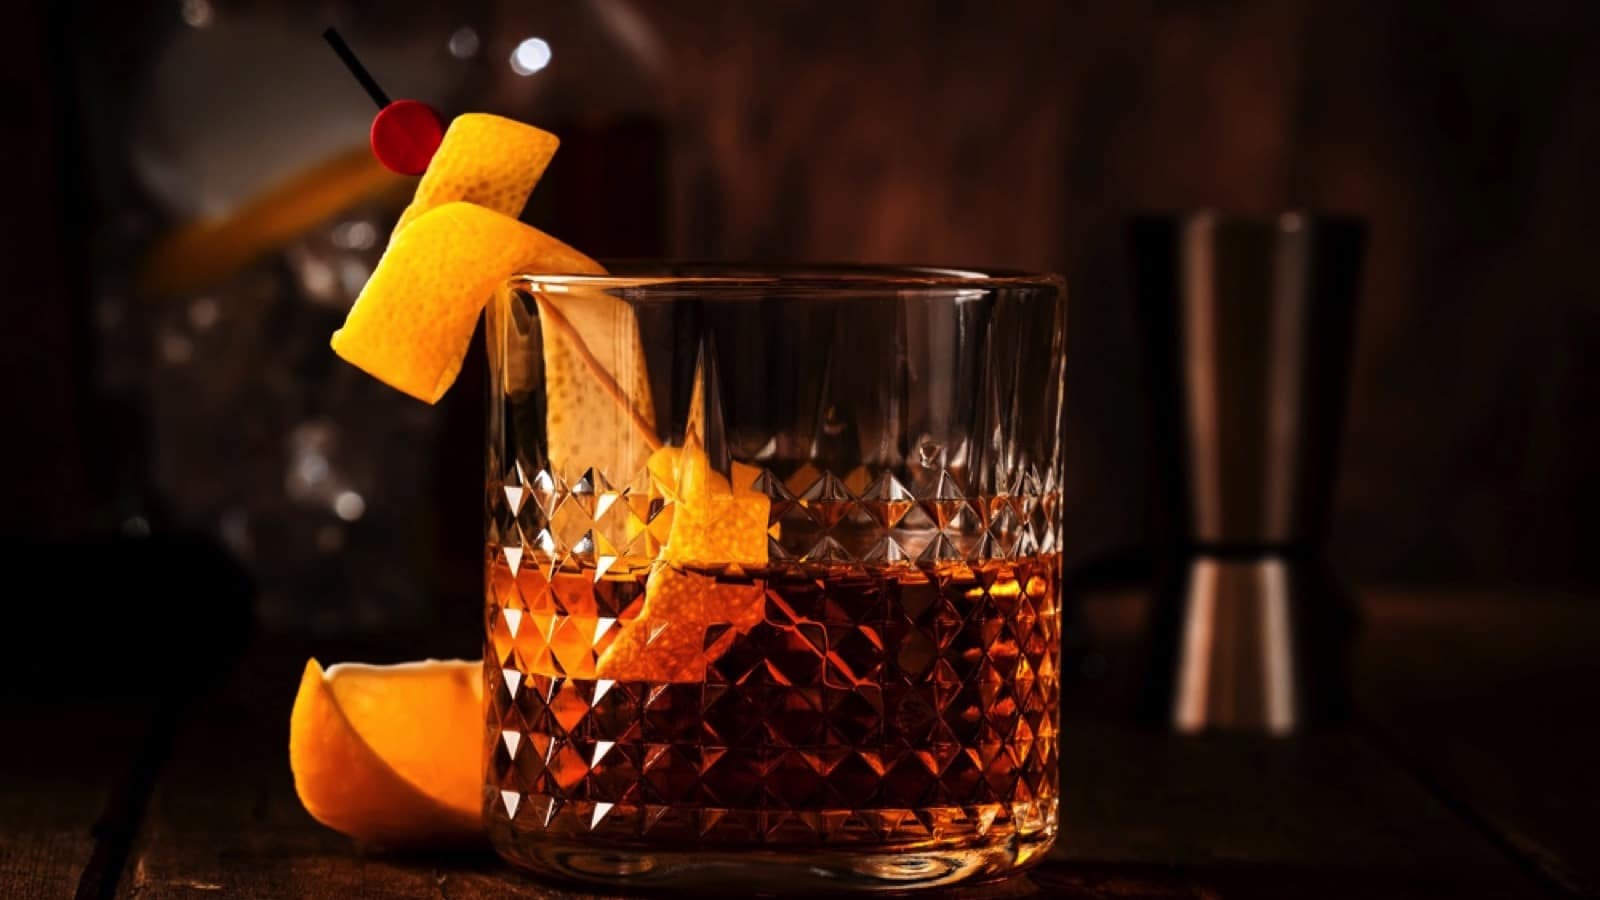 Old fashioned, classic cocktail served on the rocks